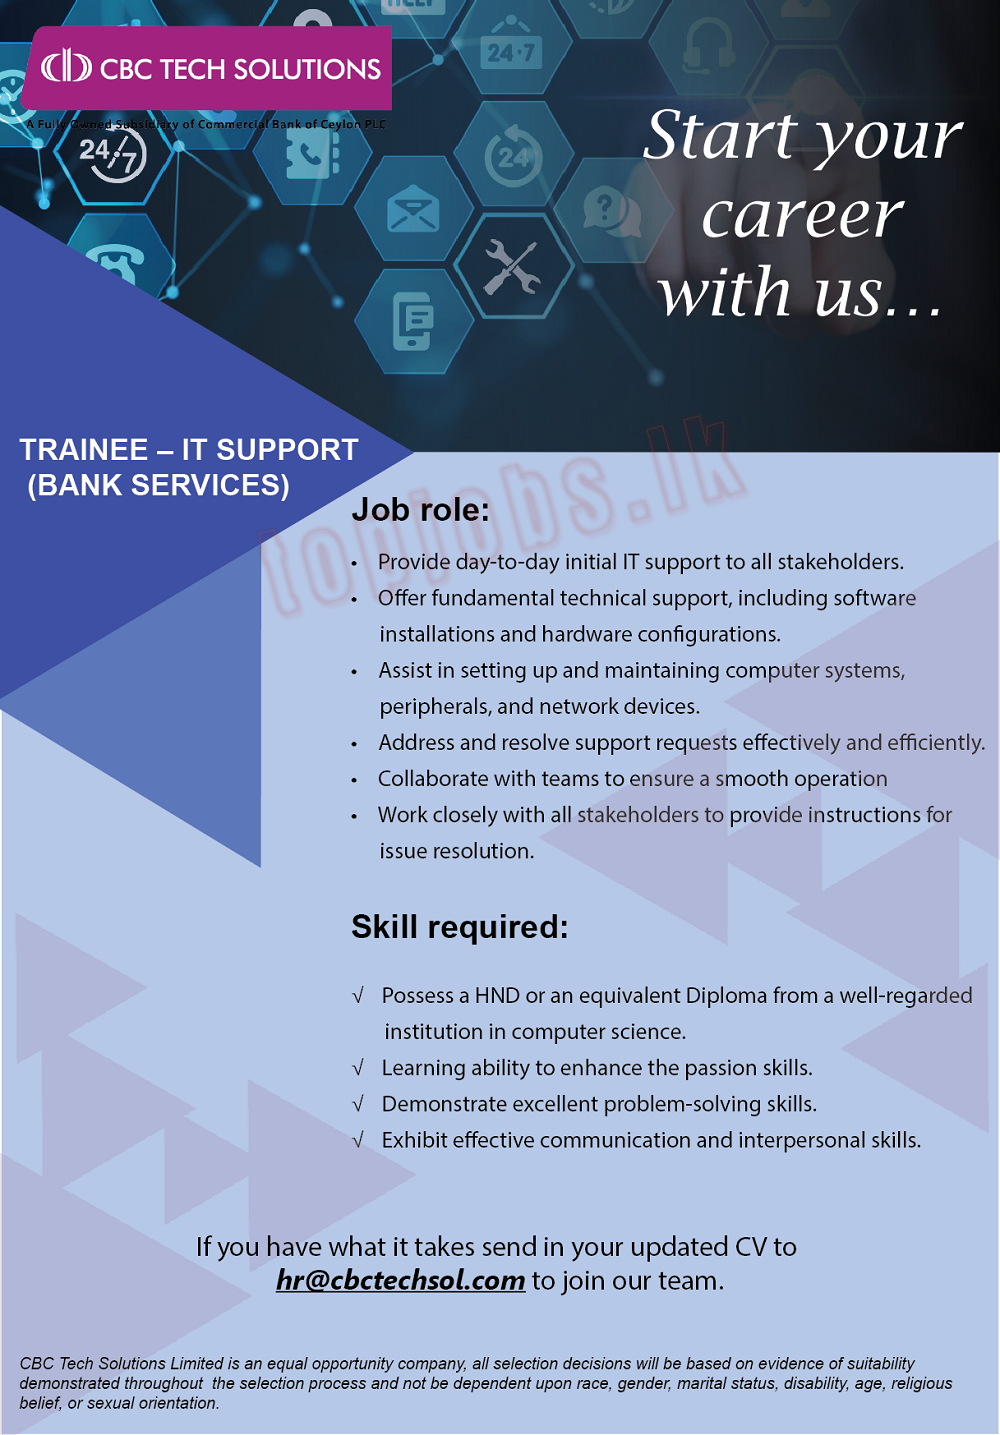 Trainee - IT Support (Bank Services)